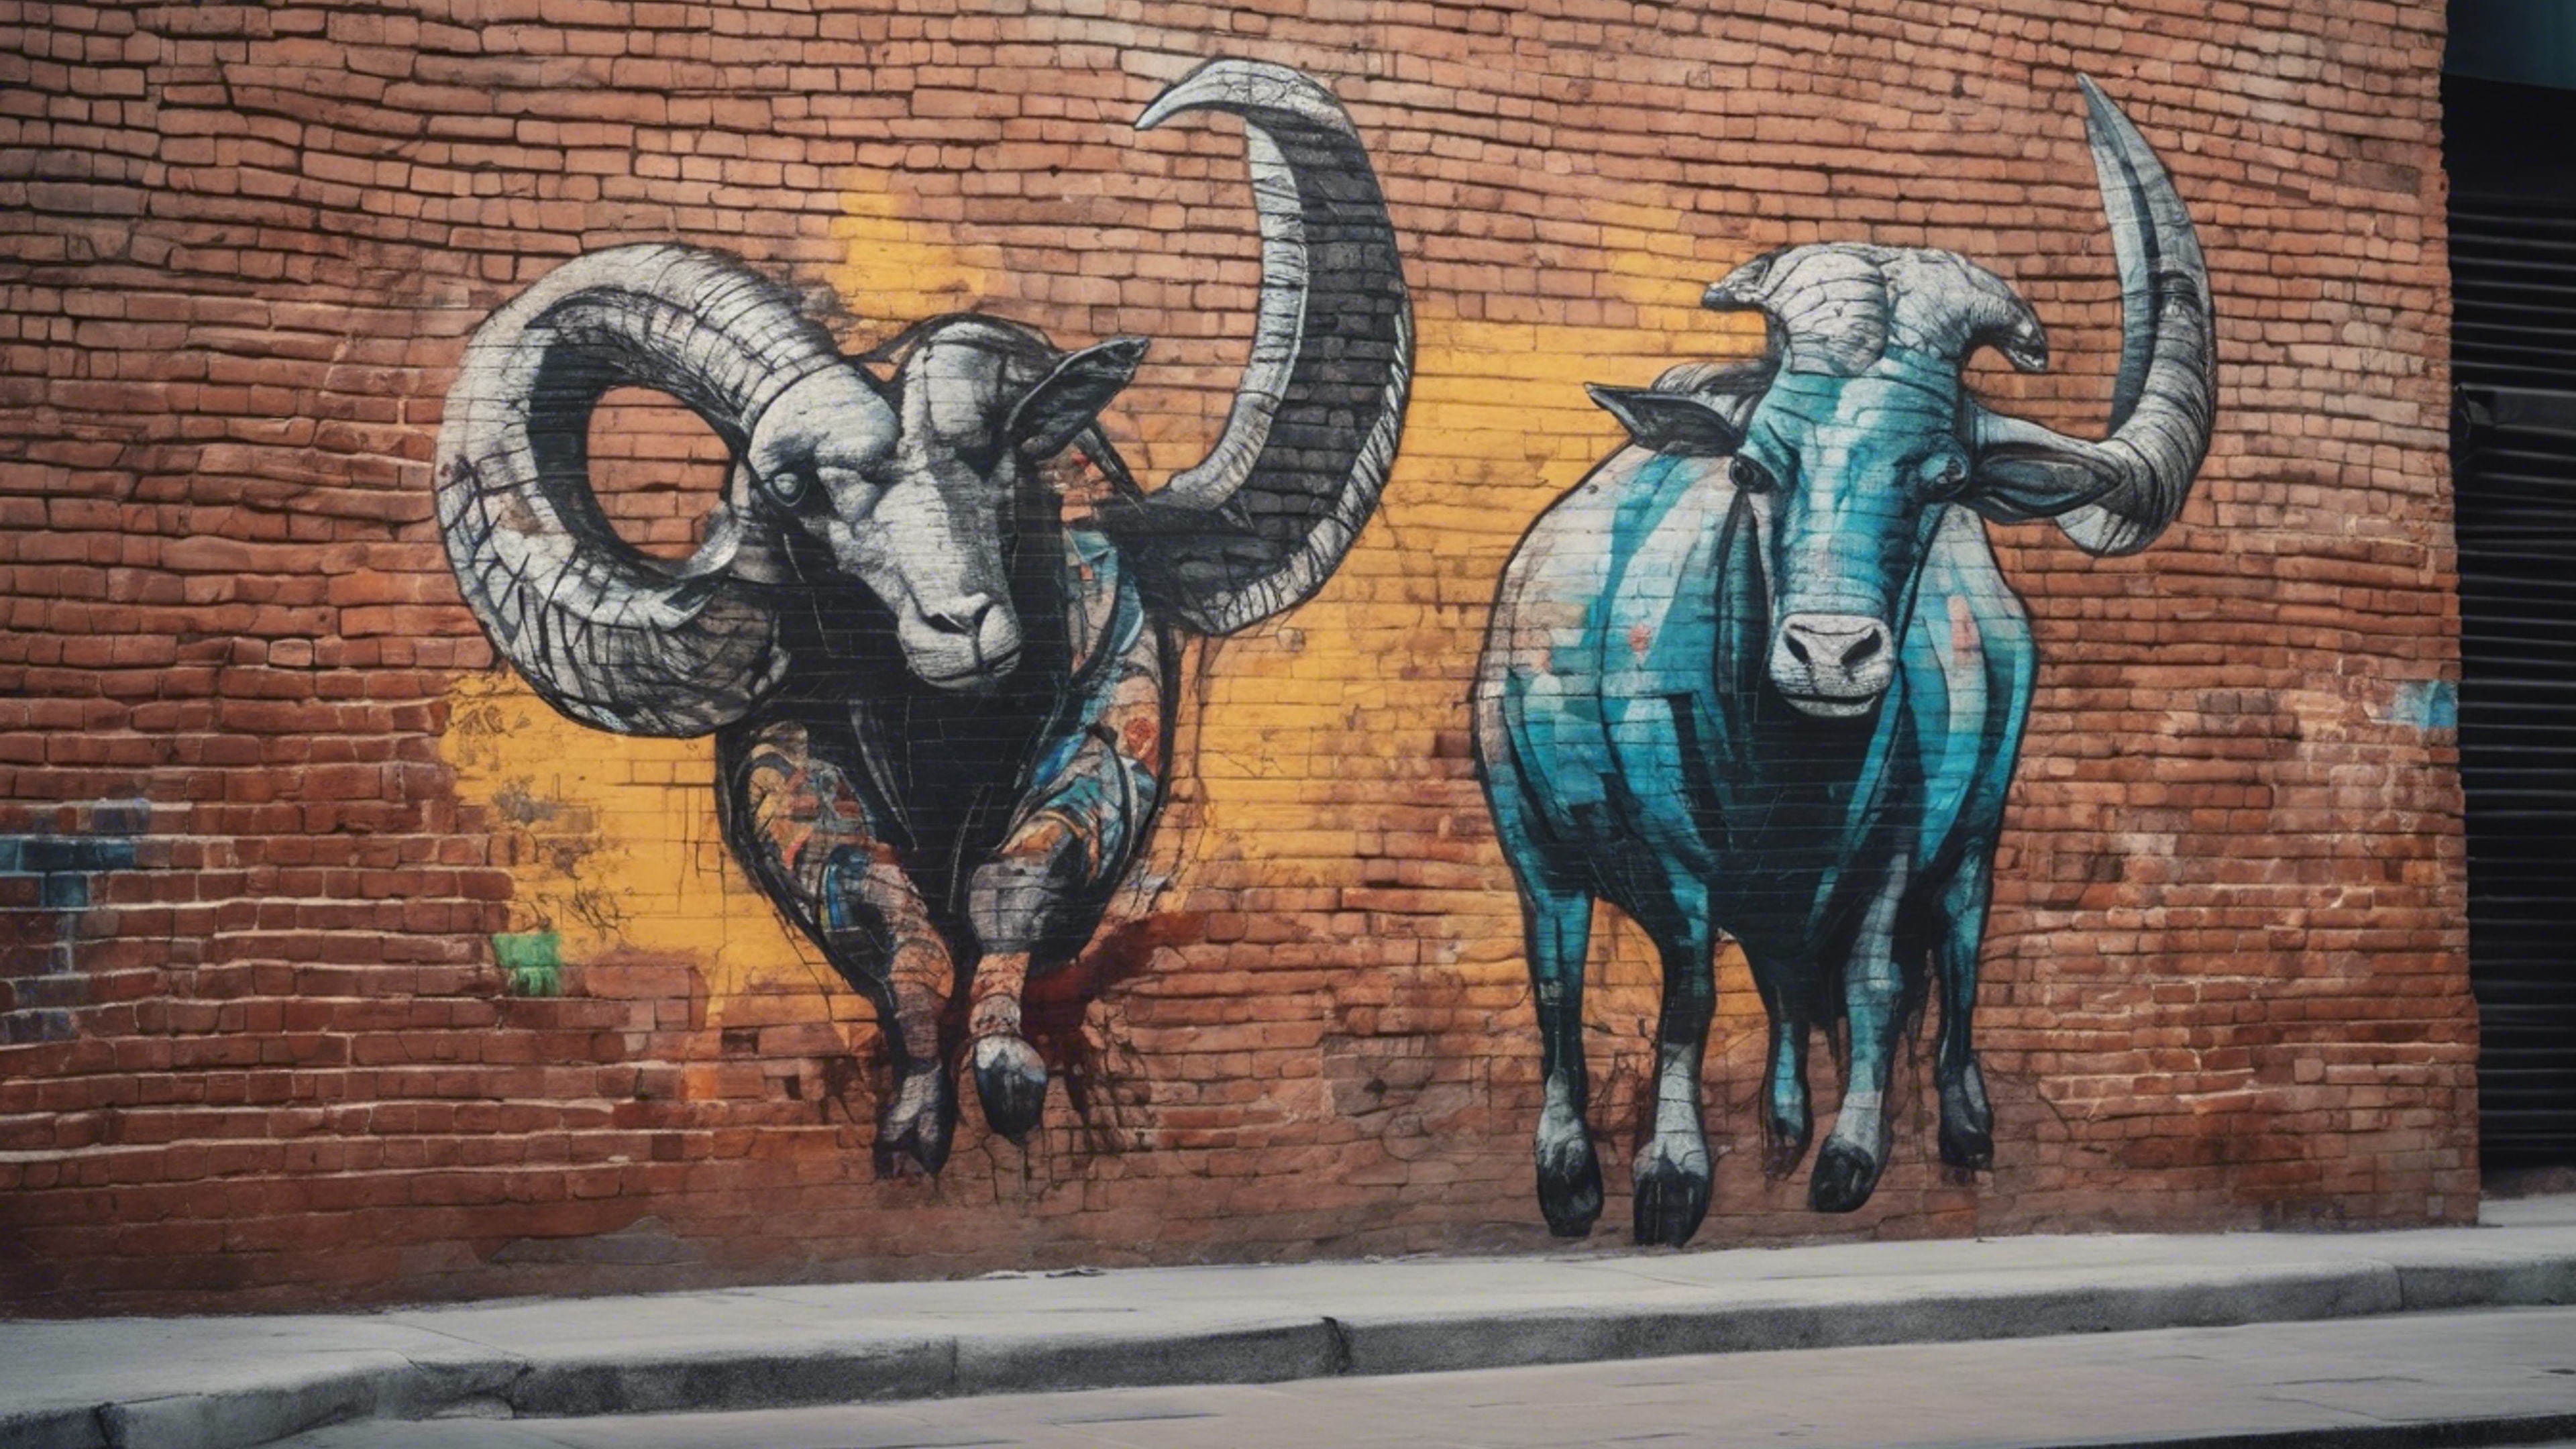 A Capricorn painted as street art on a brick wall in a busy city street. Tapet[8124c45194ee4830b5c7]